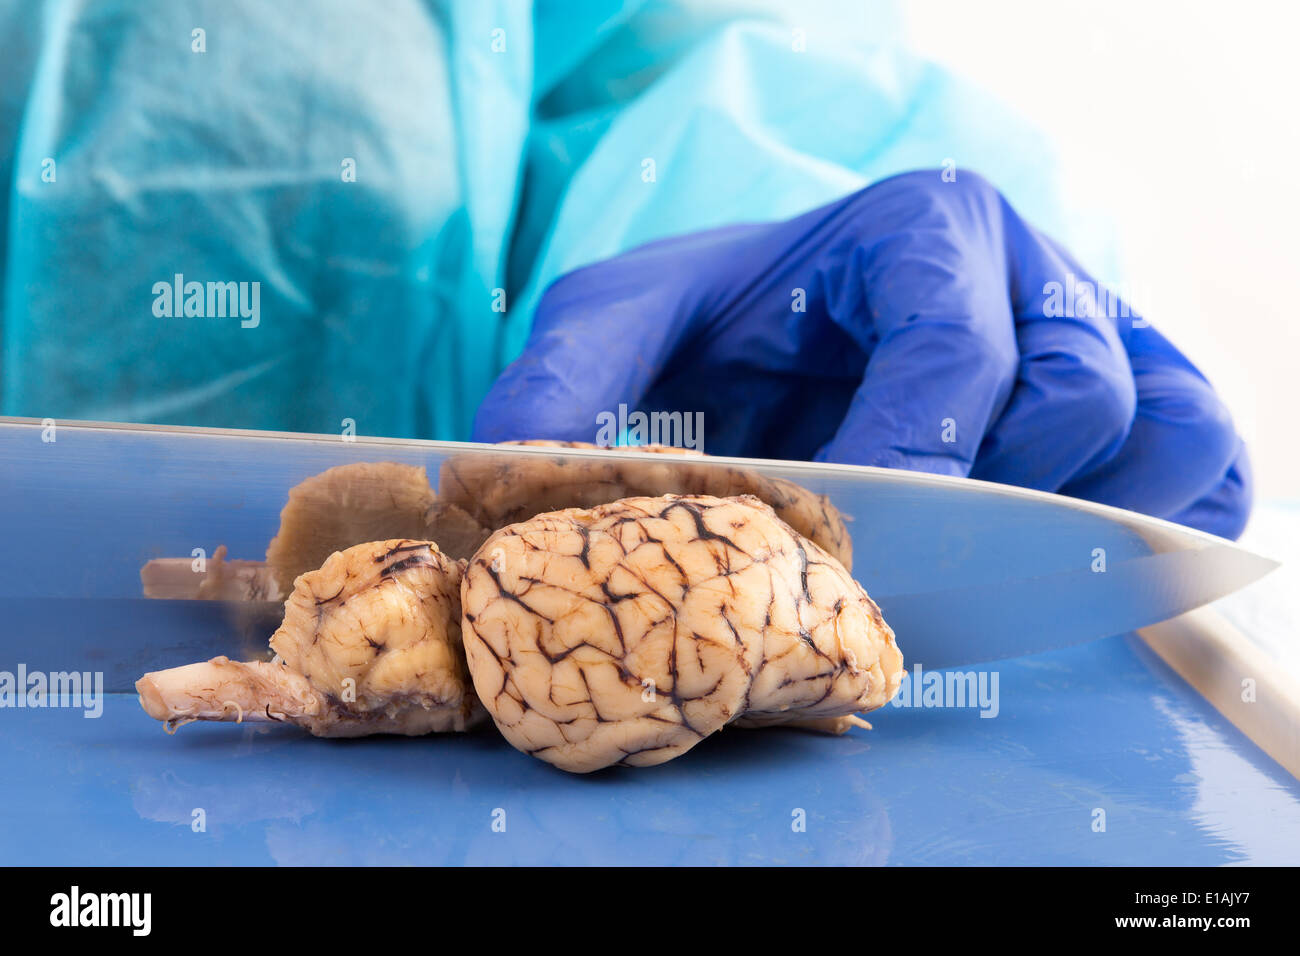 Slicing a cow brain with a blade in anatomy class down the mid section to obtain a longitudinal cross-section to study Stock Photo